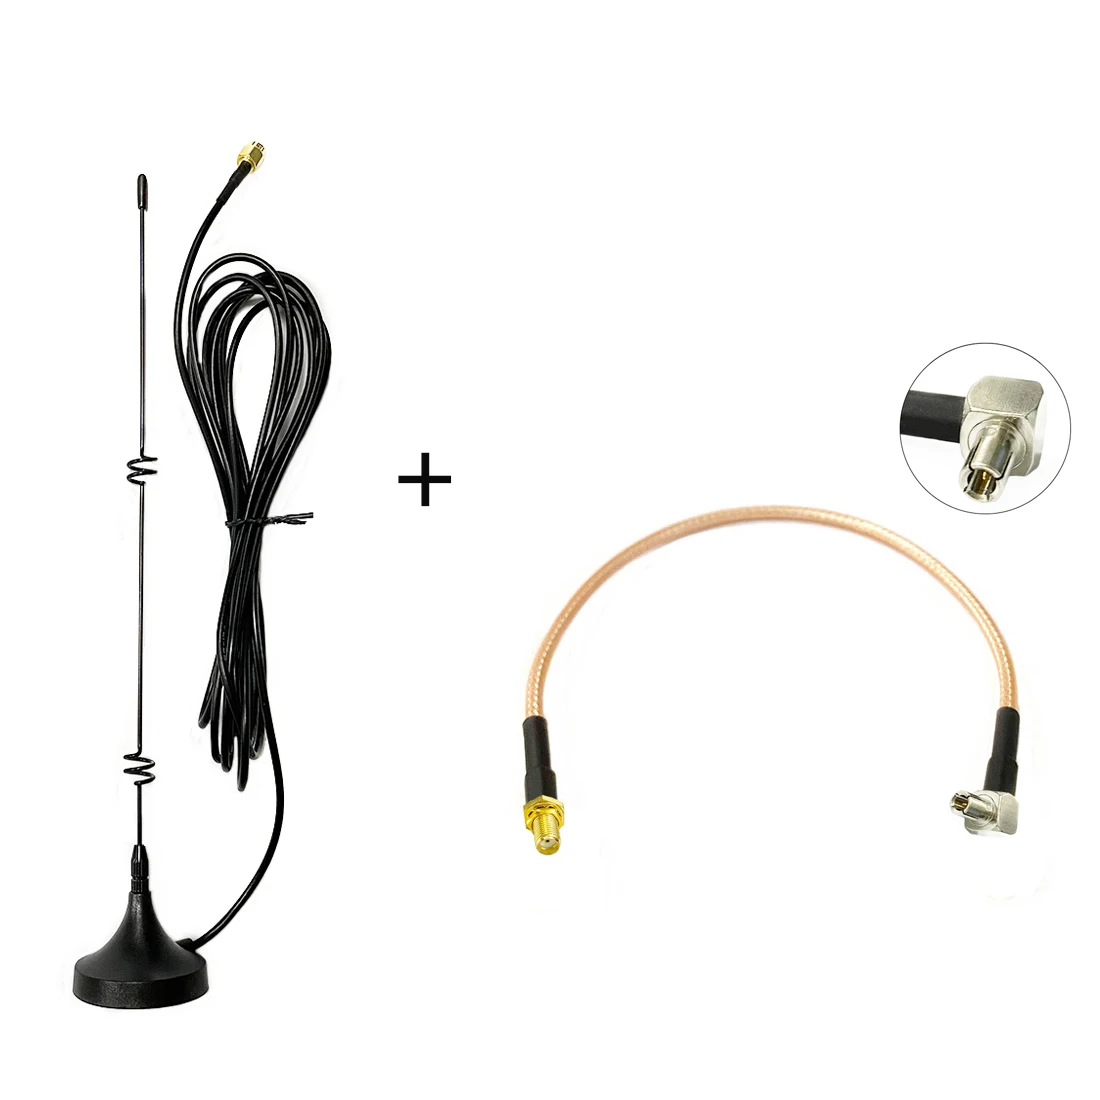 4G 3G GSM Antenna 6dbi High Gain Magnetic Base with 3meters Cable SMA Male +SMA Female Connector  to TS9 Male RG316 Cable 15cm